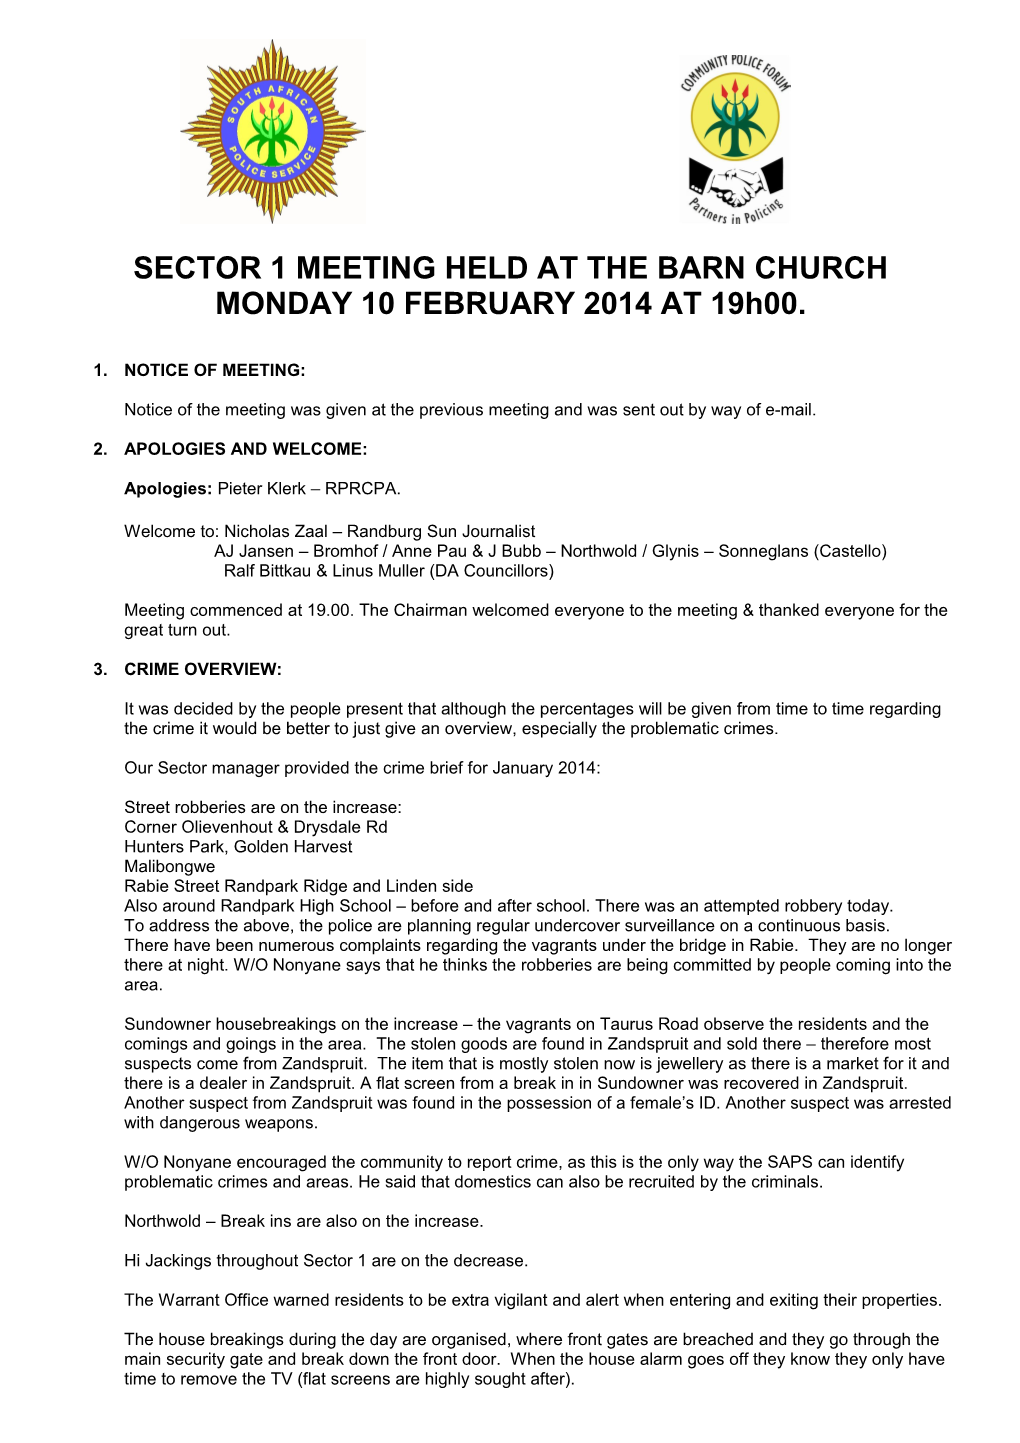 SECTOR 1 MEETING HELD at the BARN CHURCH MONDAY 10 FEBRUARY 2014 at 19H00